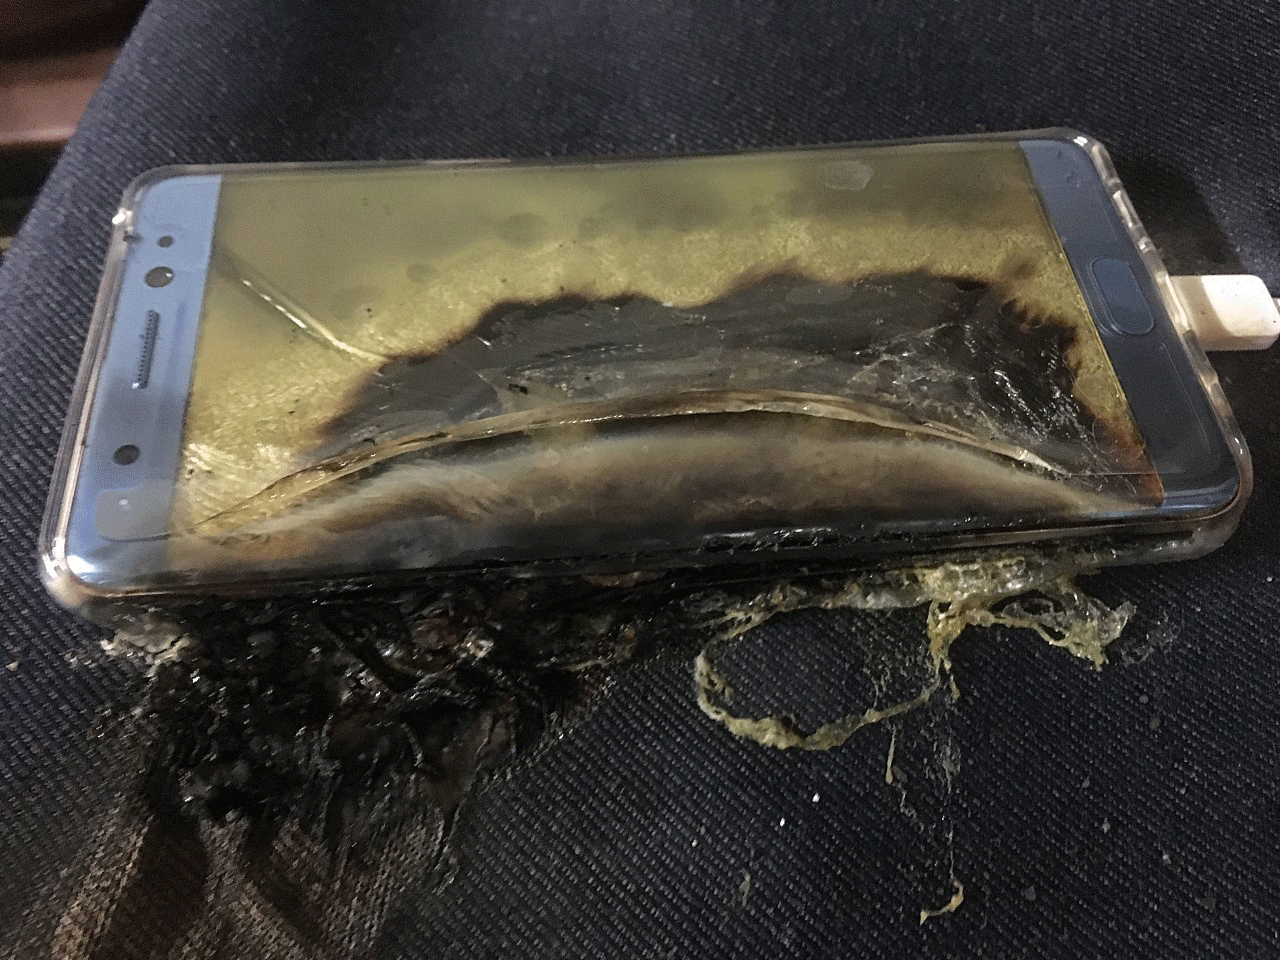 Some Samsung Note 7s have caught on fire